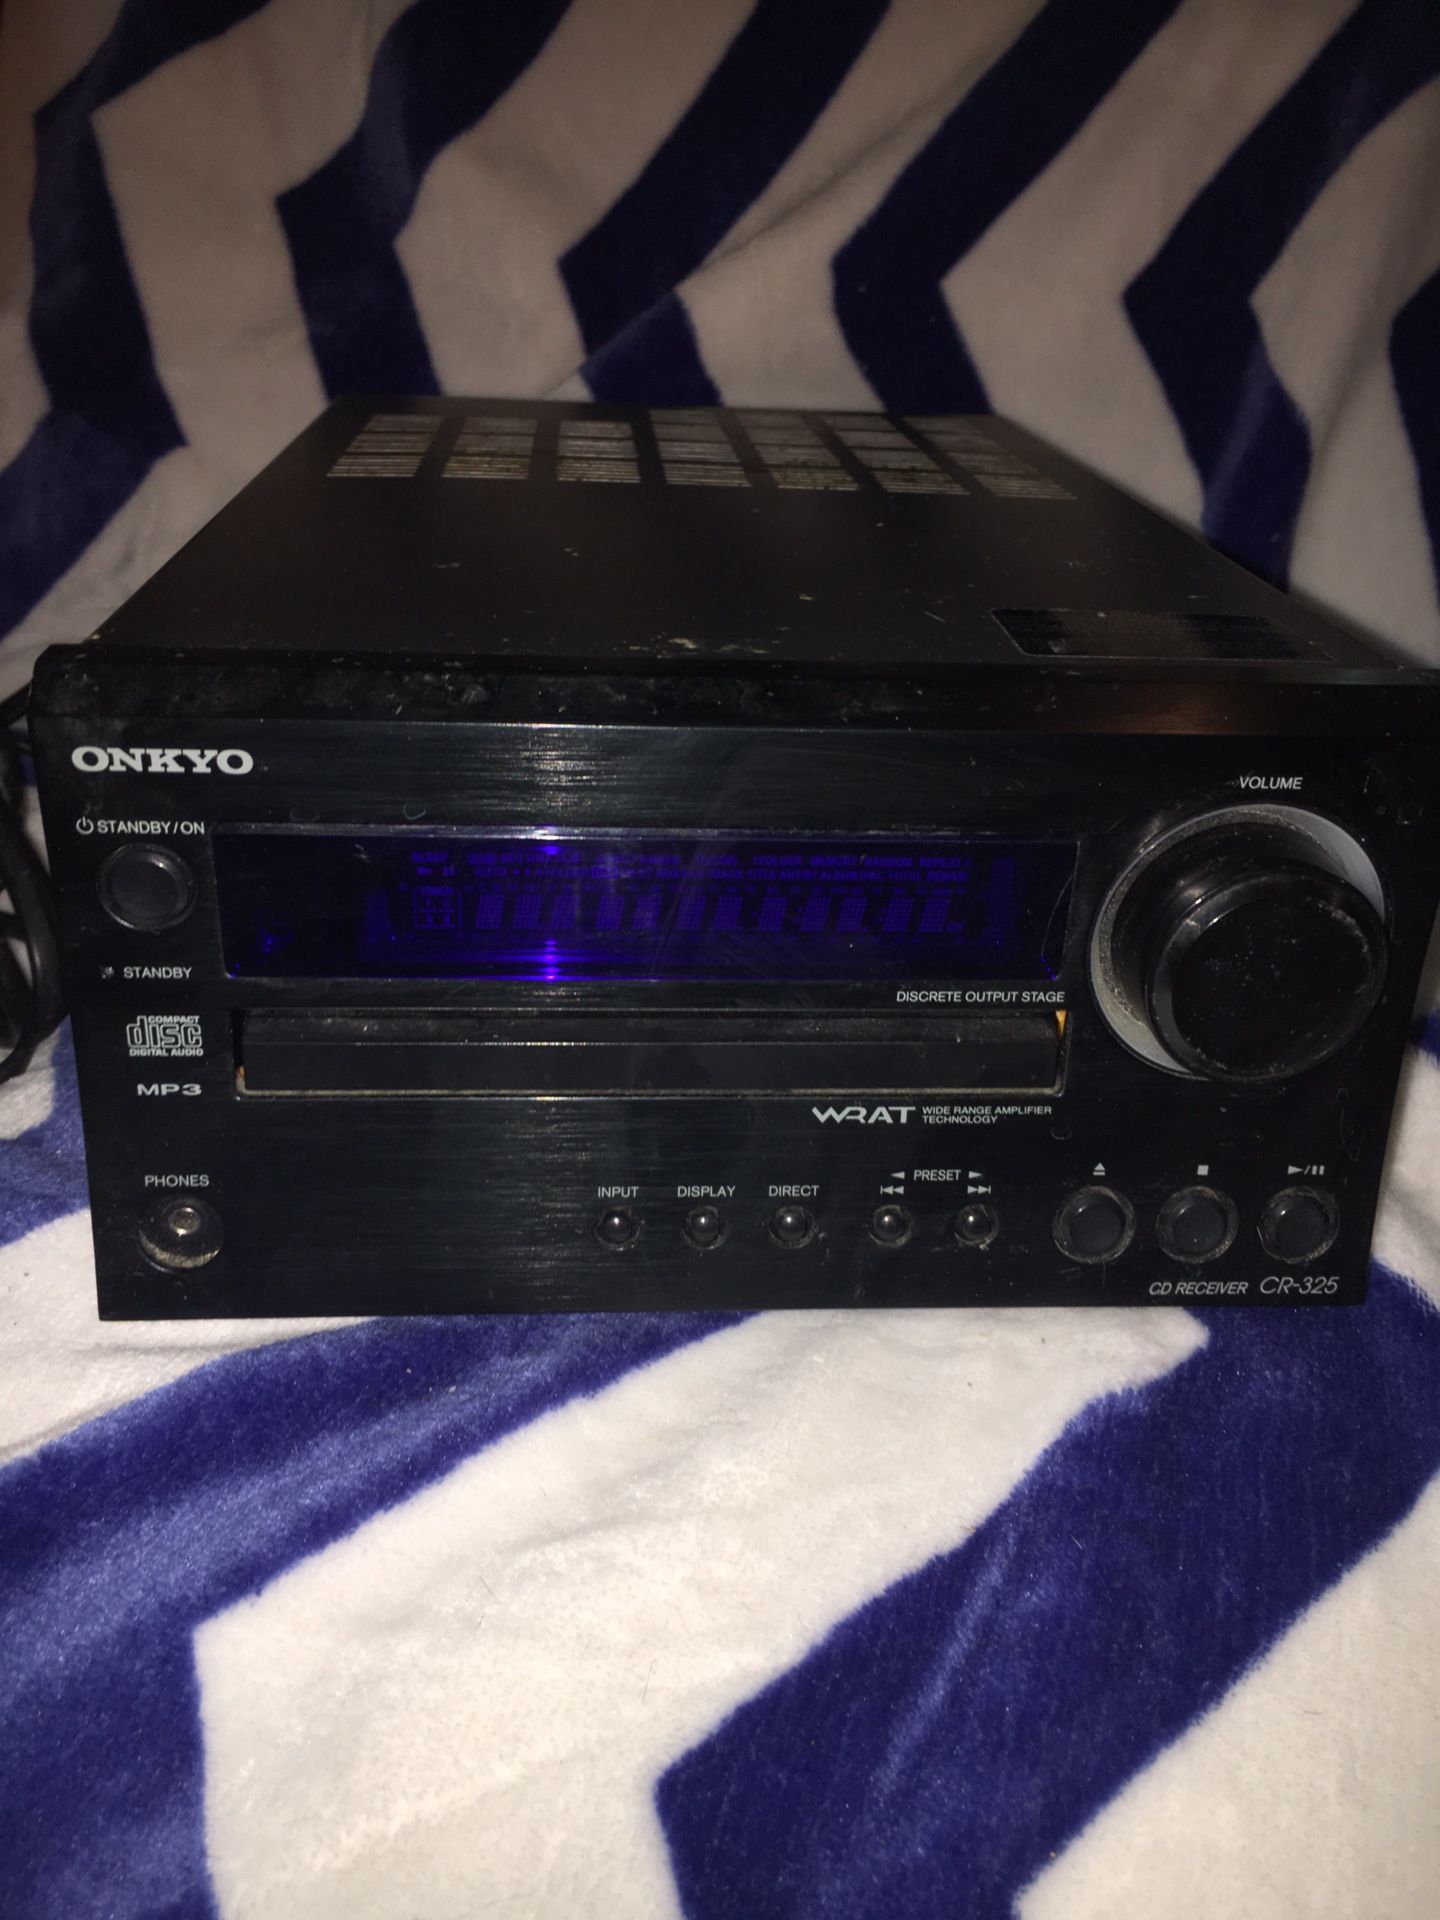 Onkyo compact stereo amp receiver